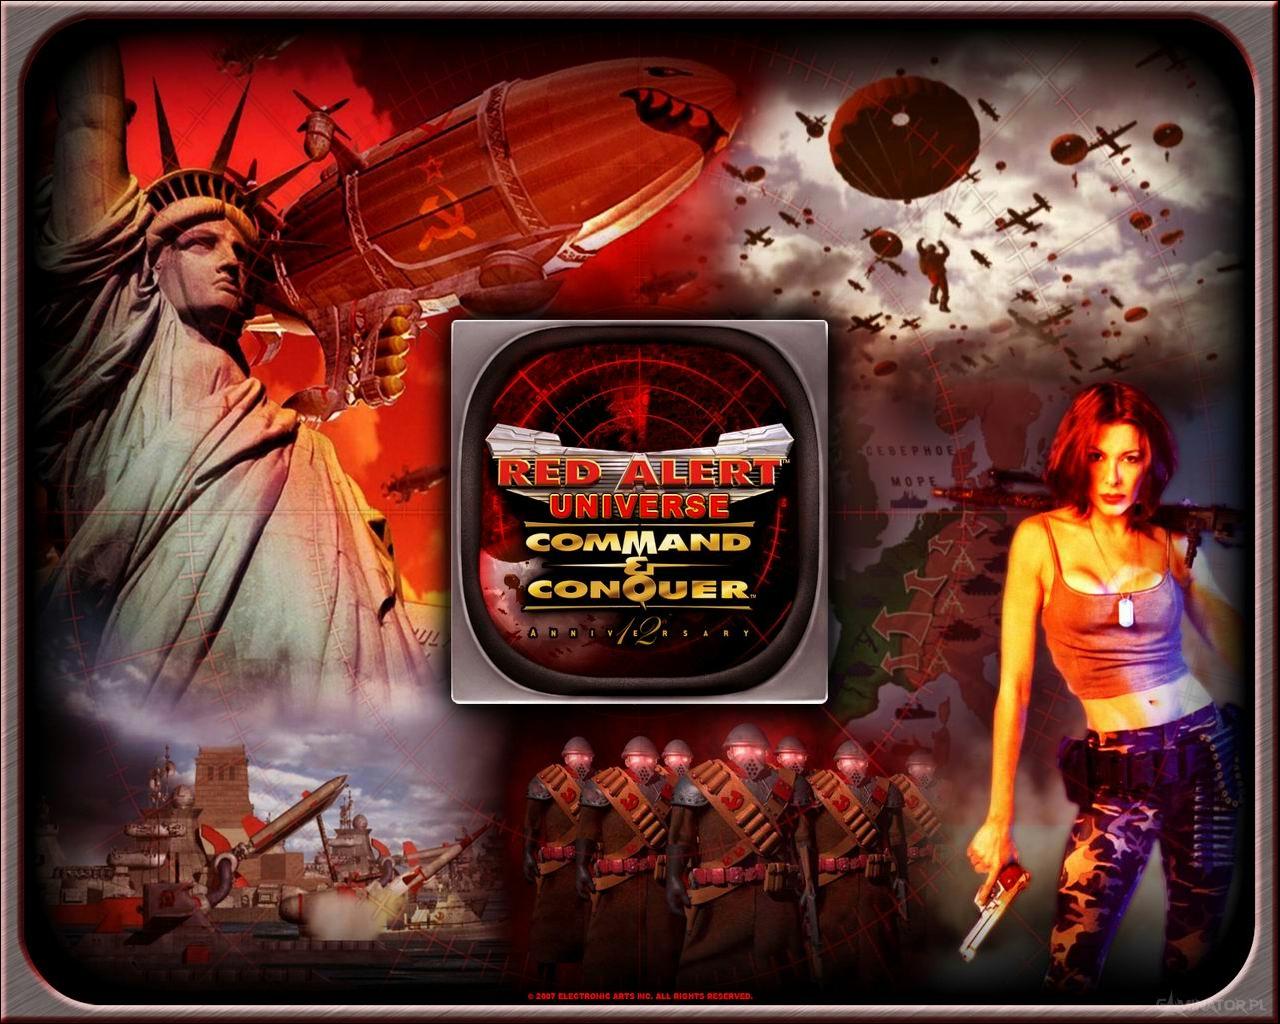 Image Command & Conquer Command & Conquer Red Alert 2 Games